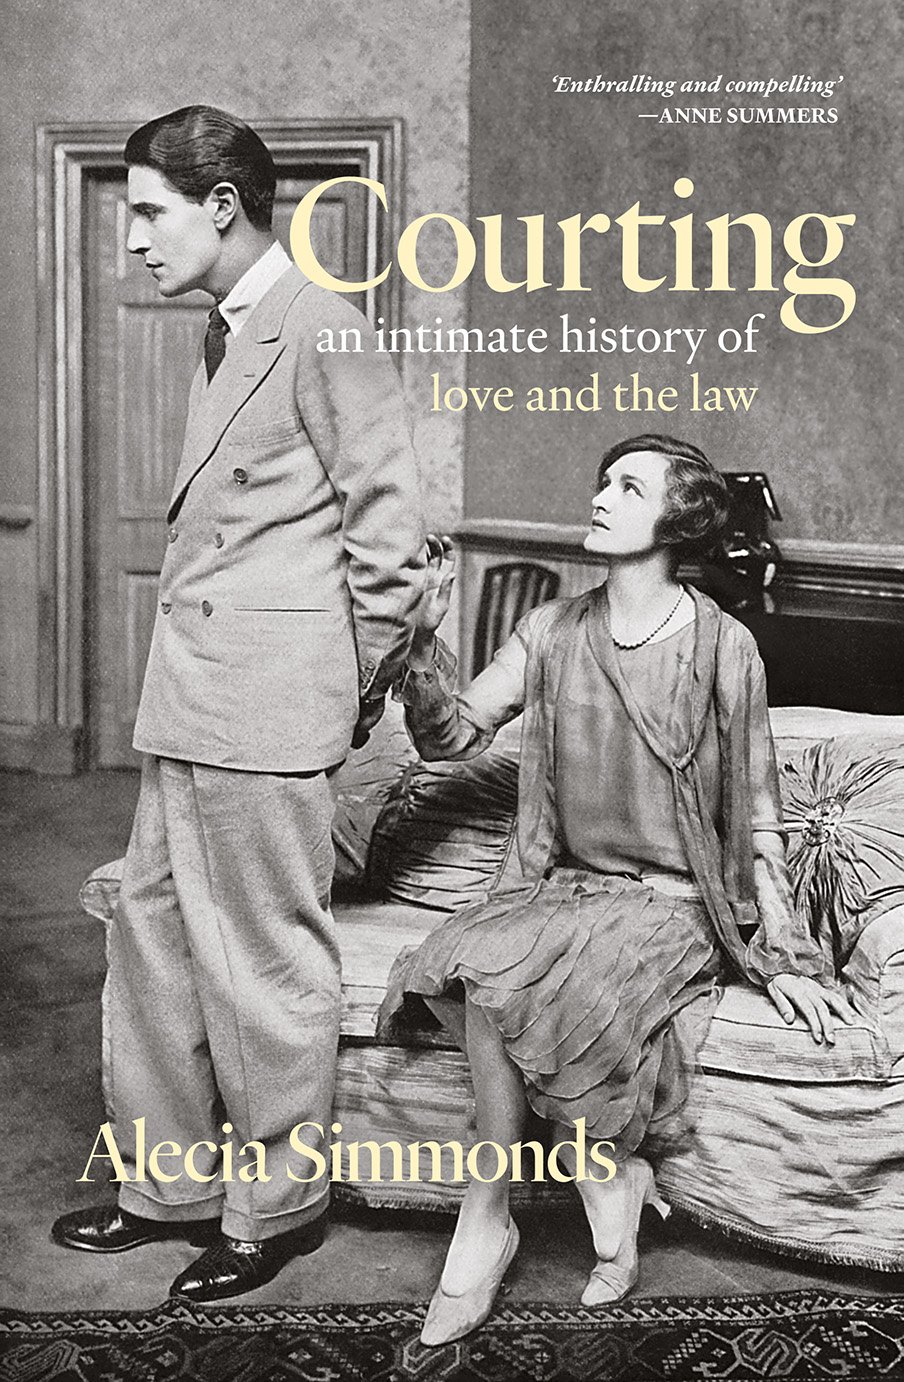 Courting: An intimate history of love and the law